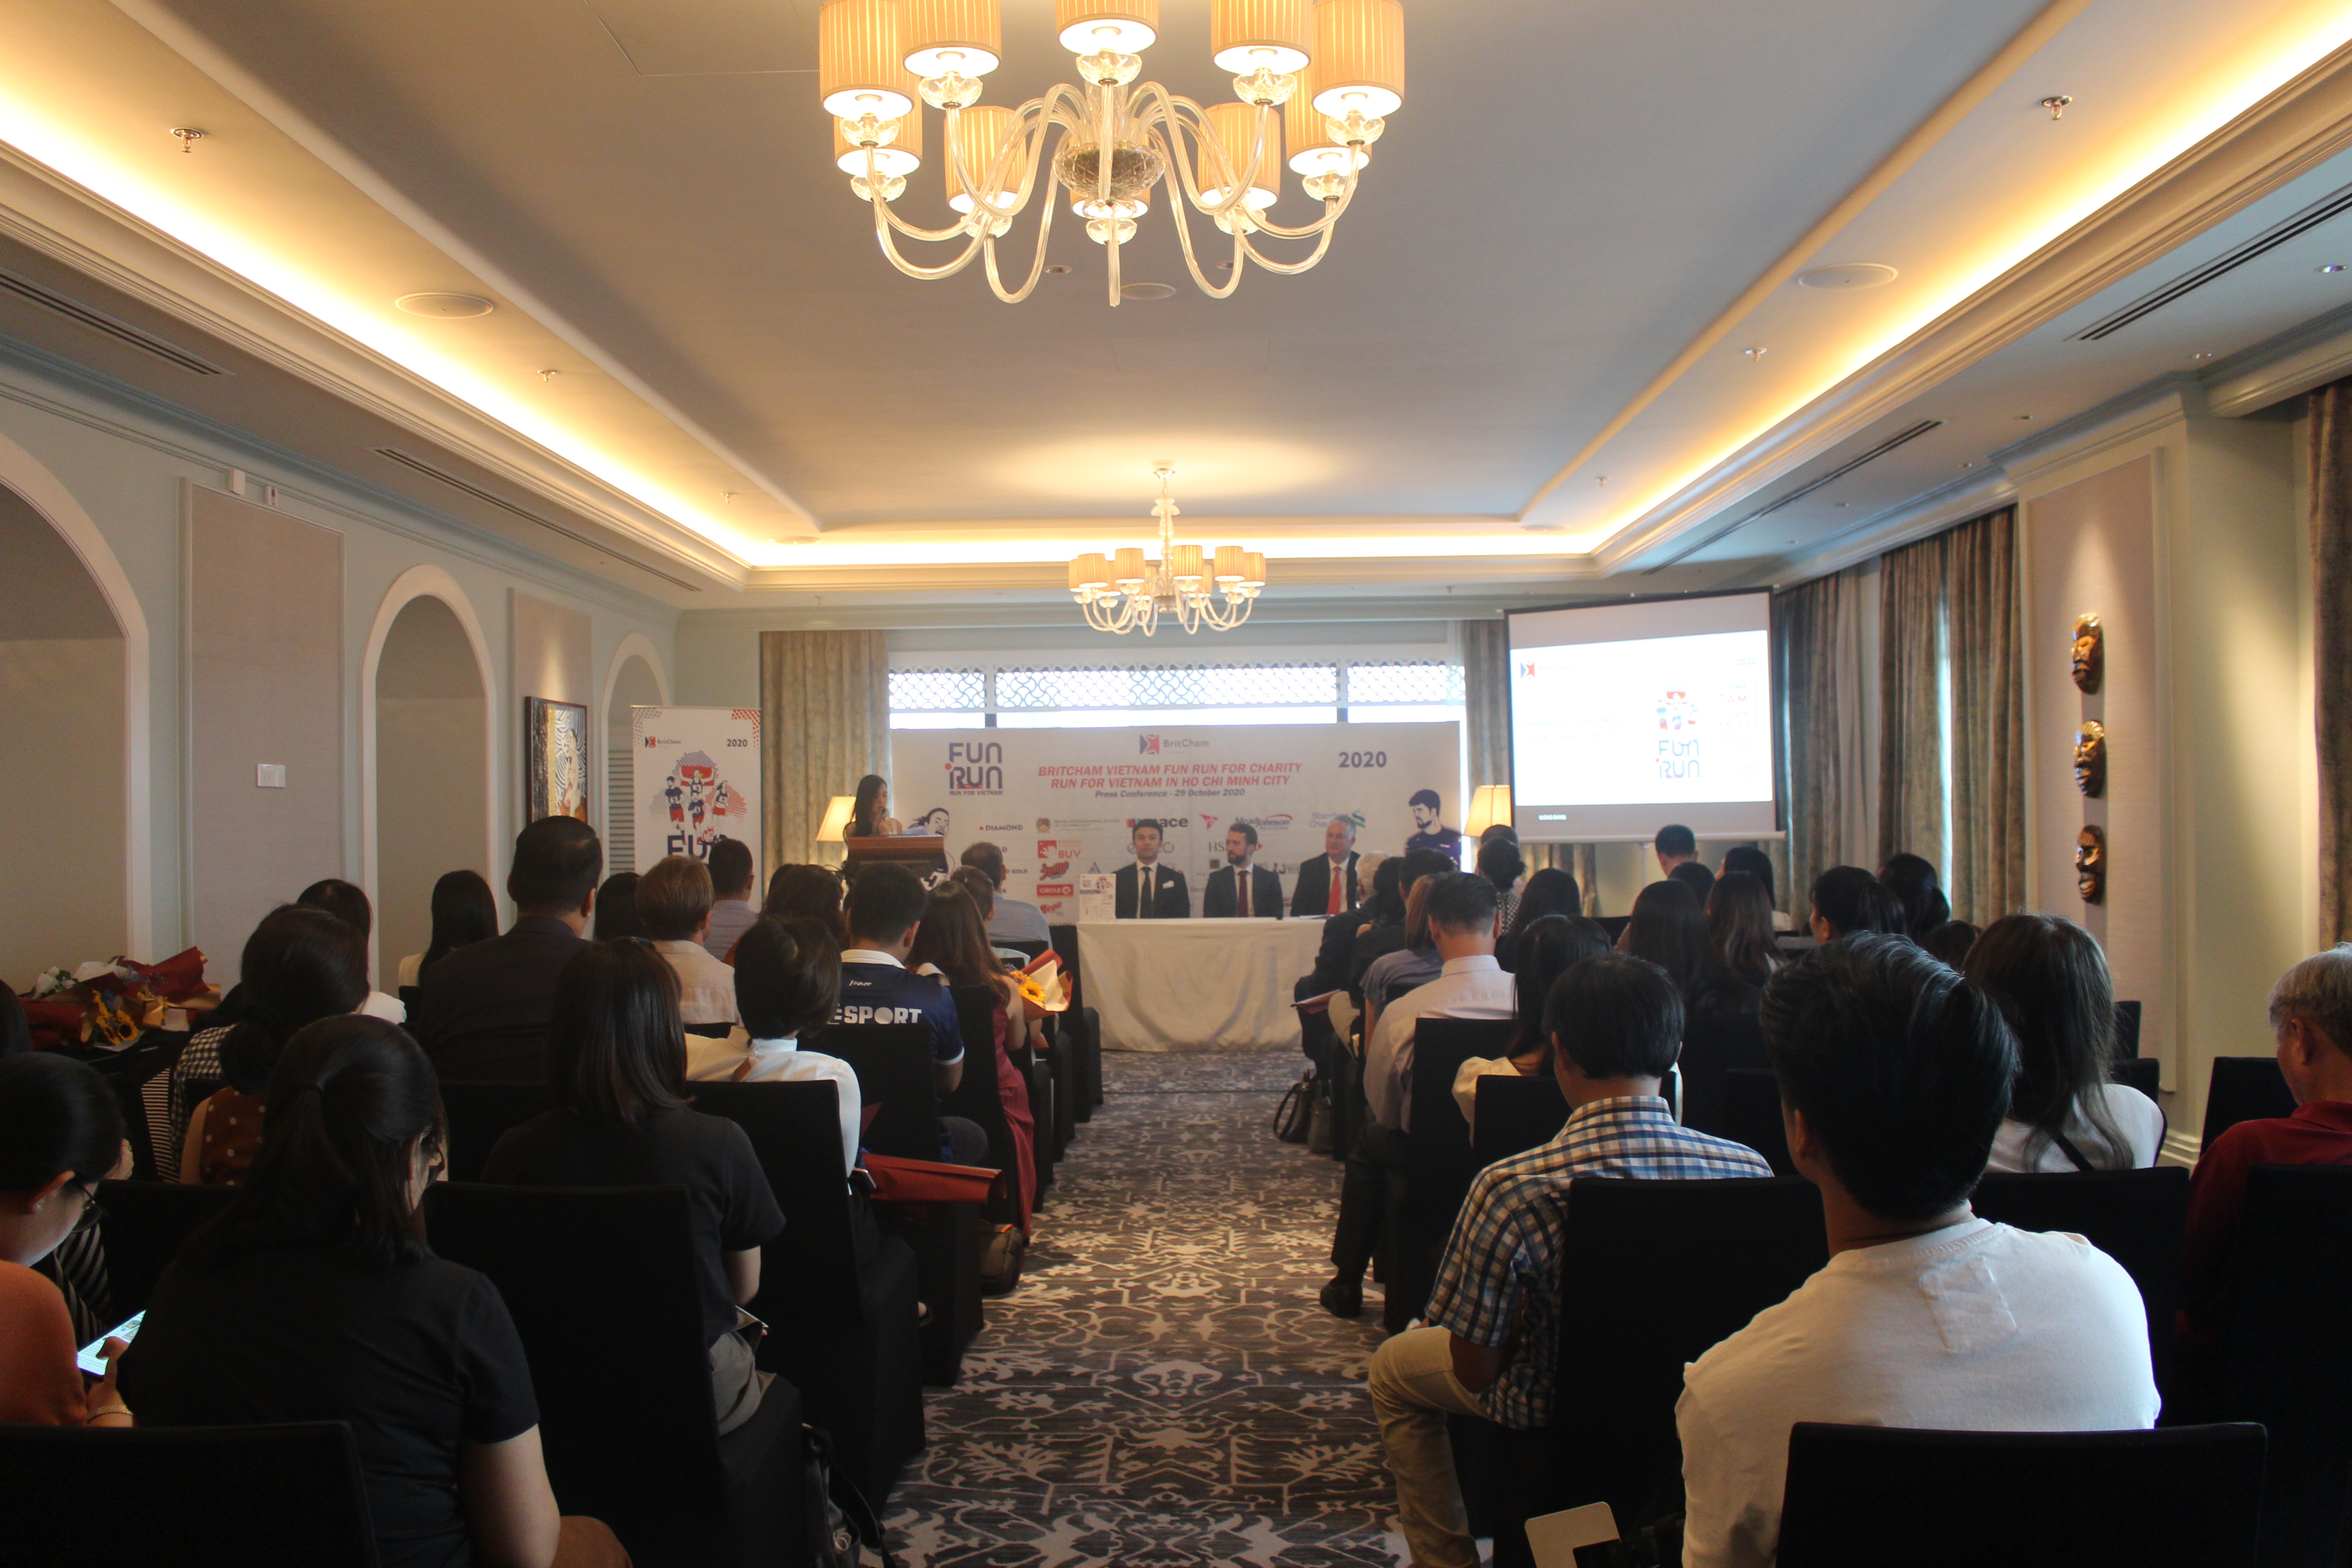 The organizers announce the BritCham Vietnam's Fun Run 2020 at a press conference in Ho Chi Minh City on October 29, 2020. Photo: Supplied